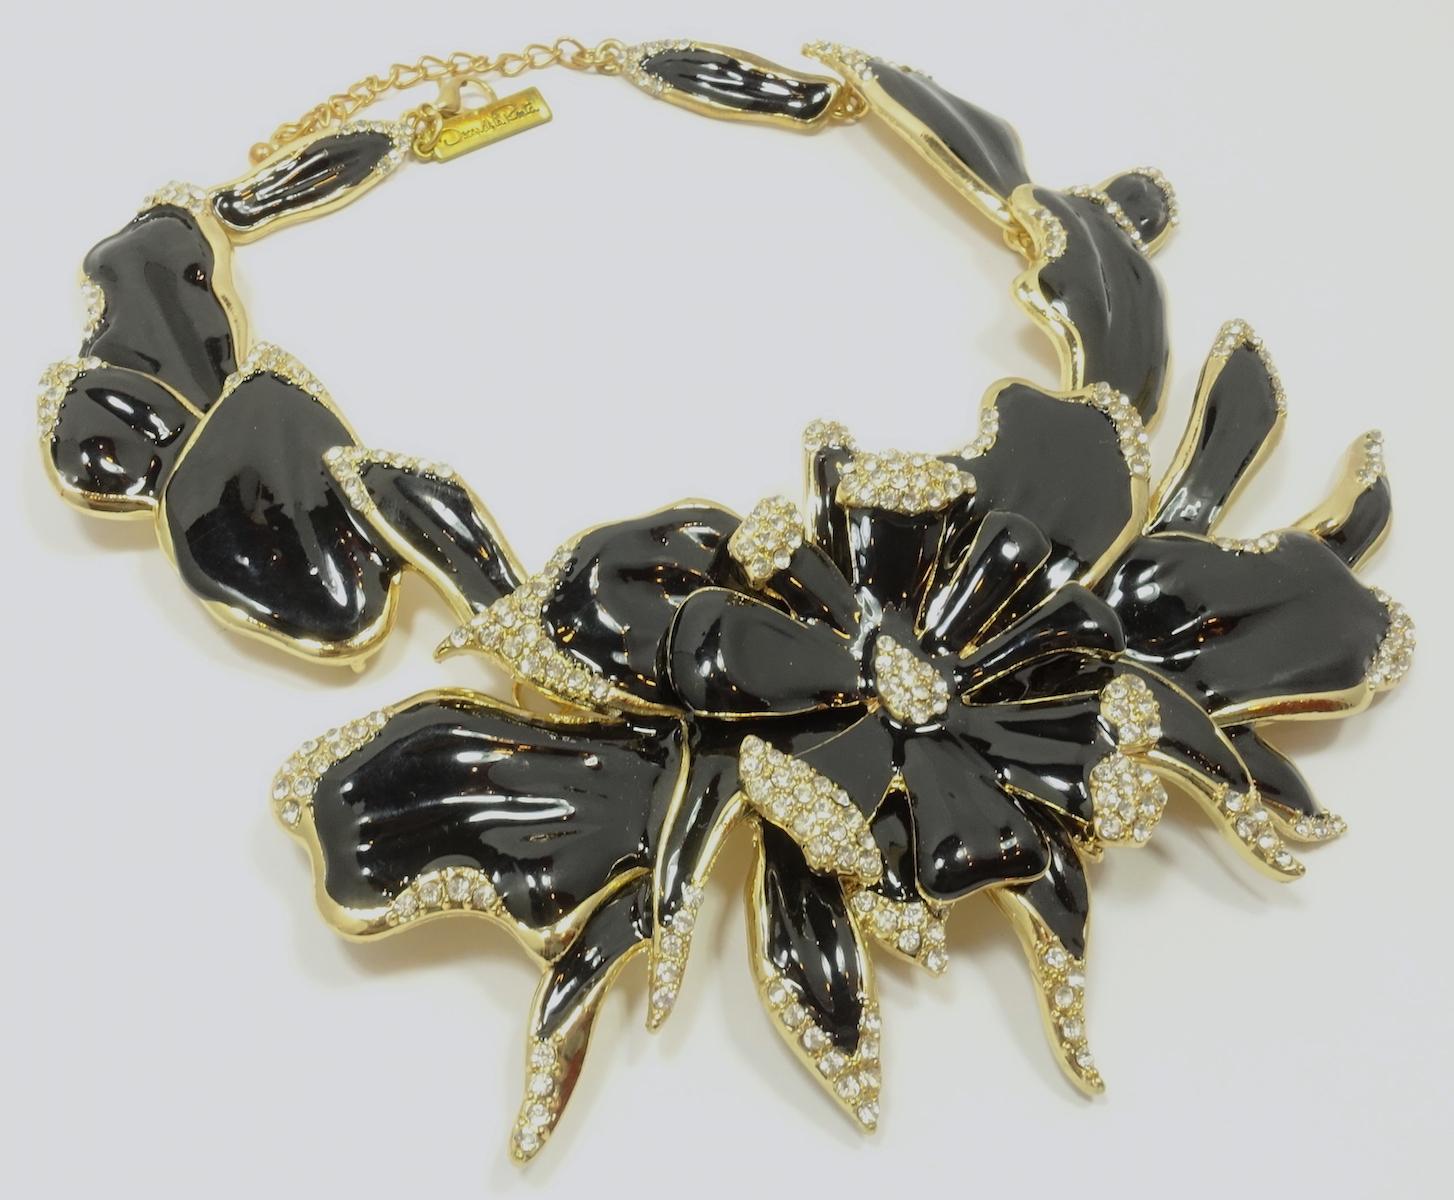 This signed Oscar de la Renta necklace features a 3-dimensional floral design with black enameling and clear crystal accents in a gold tone setting.  In excellent condition, this necklace measures 19” with a spring closure x 3” wide at the front and